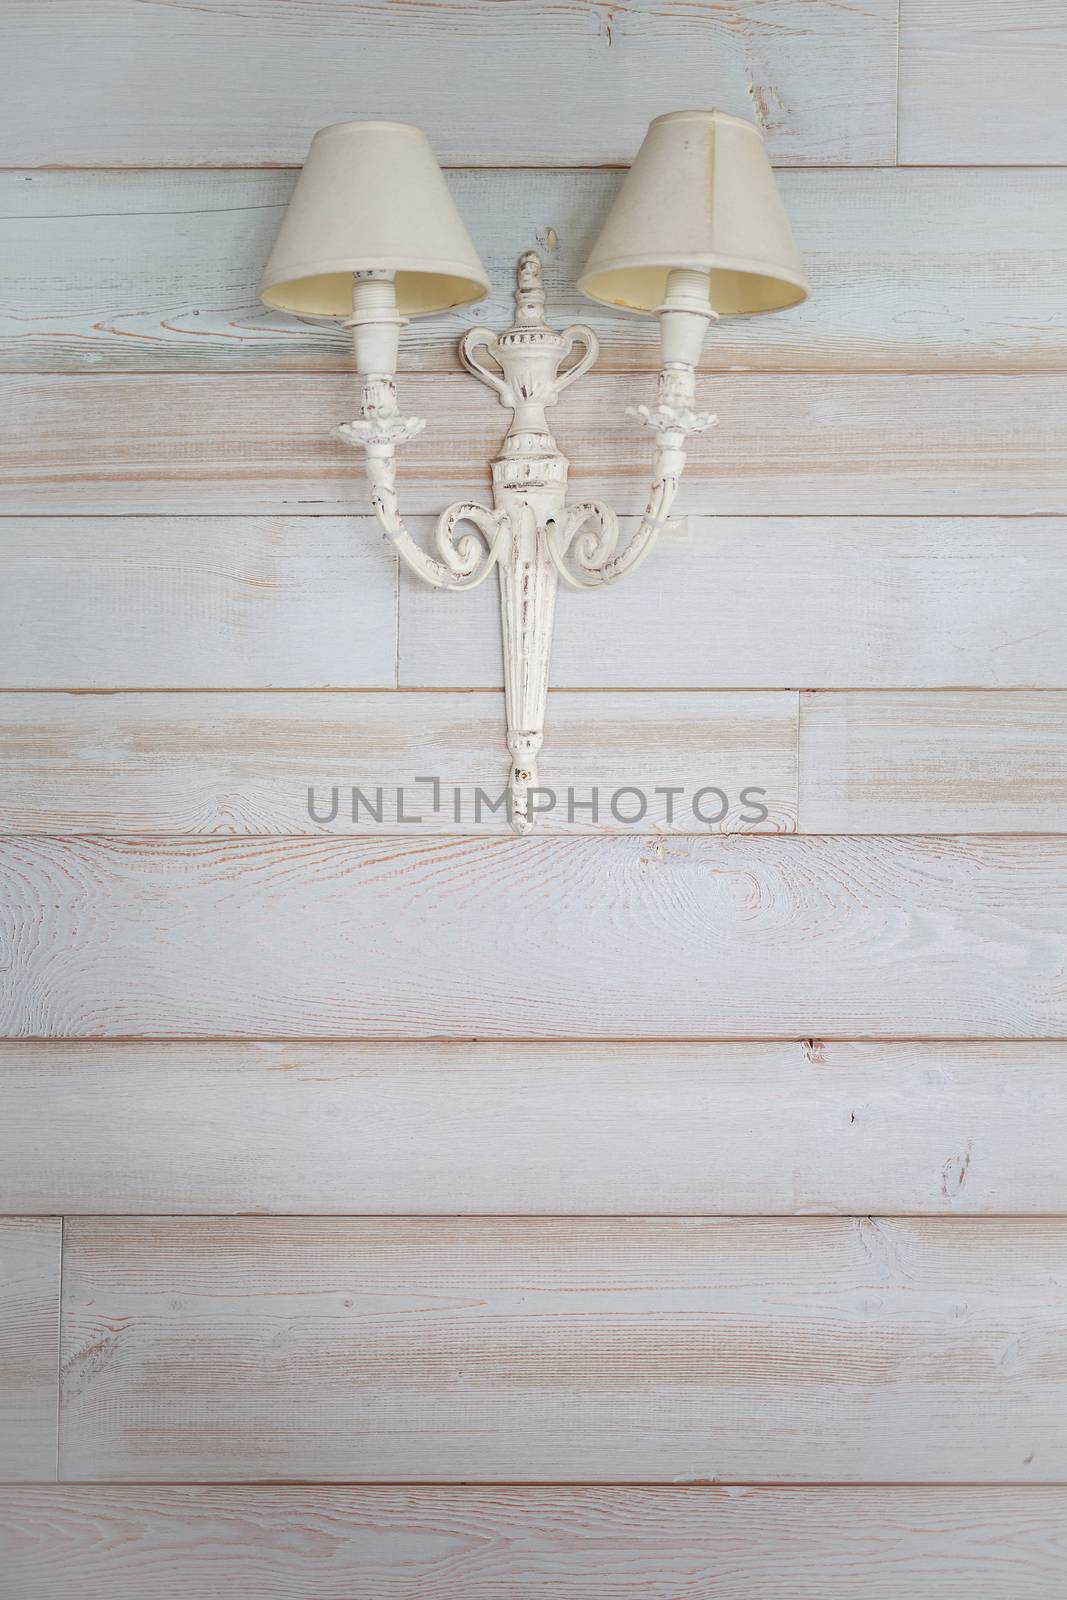 old lamp background white painted wooden Board, vintage style